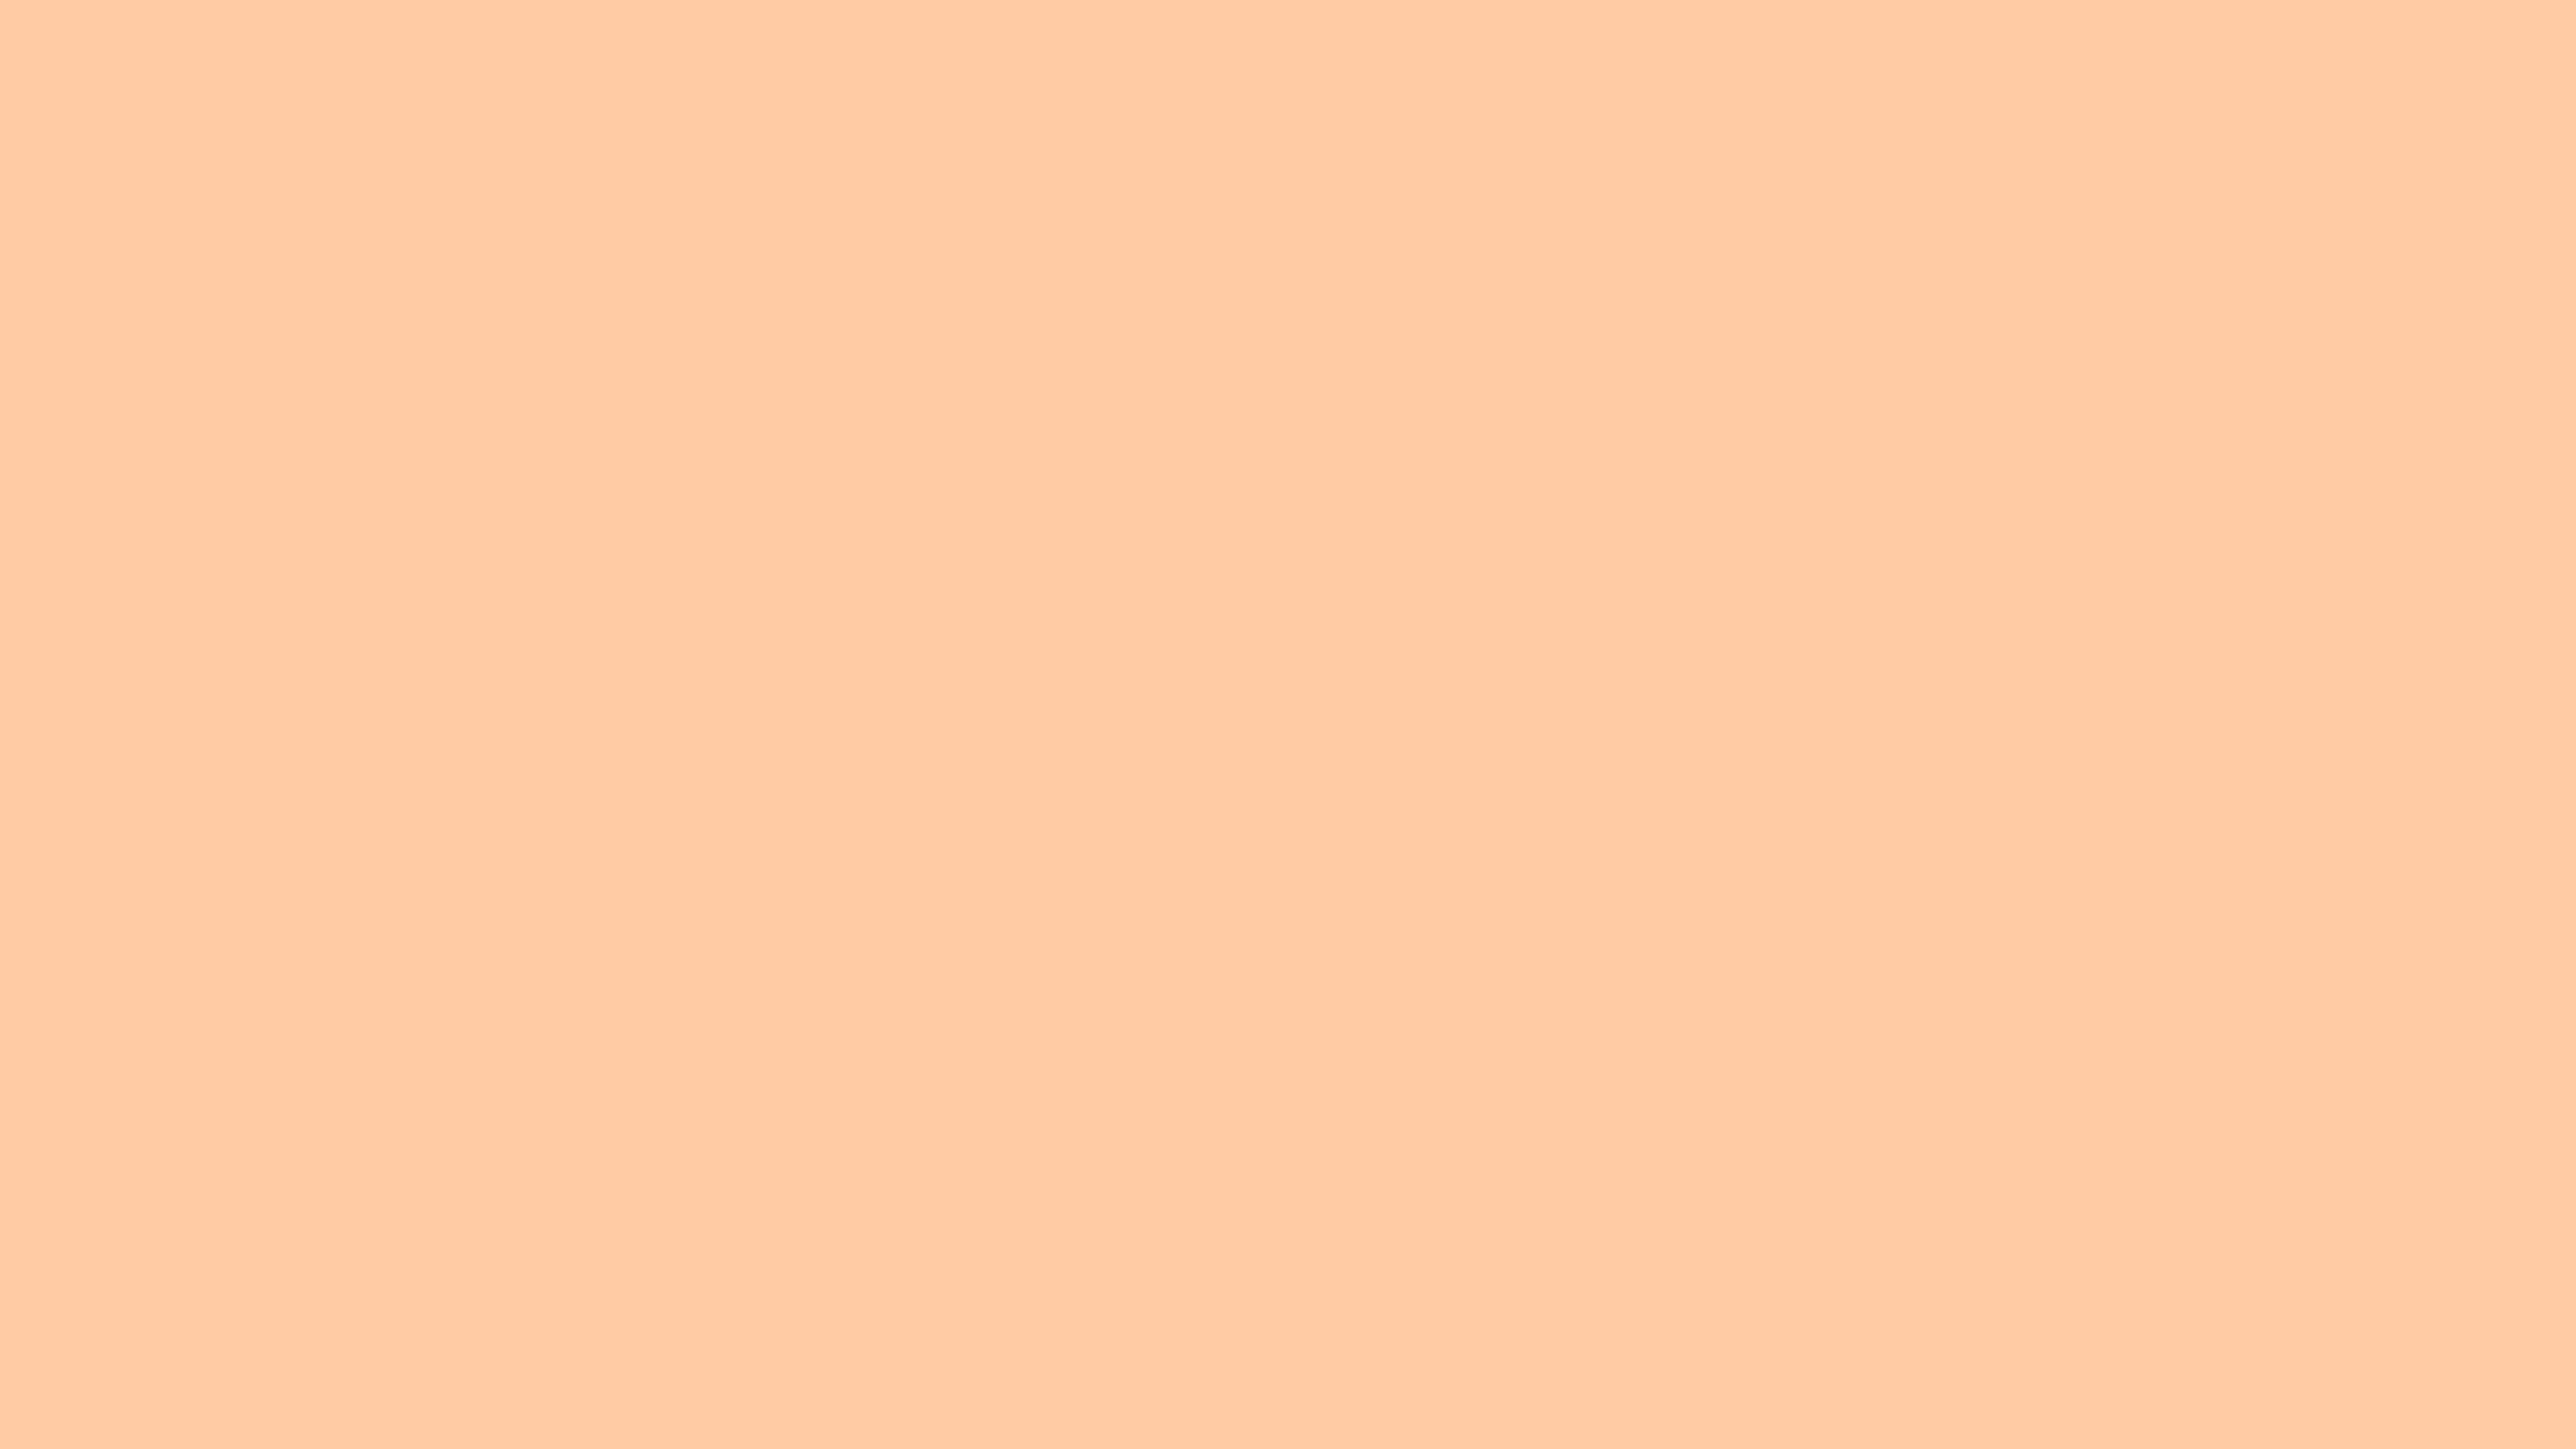 7680x4320 Deep Peach Solid Color Background